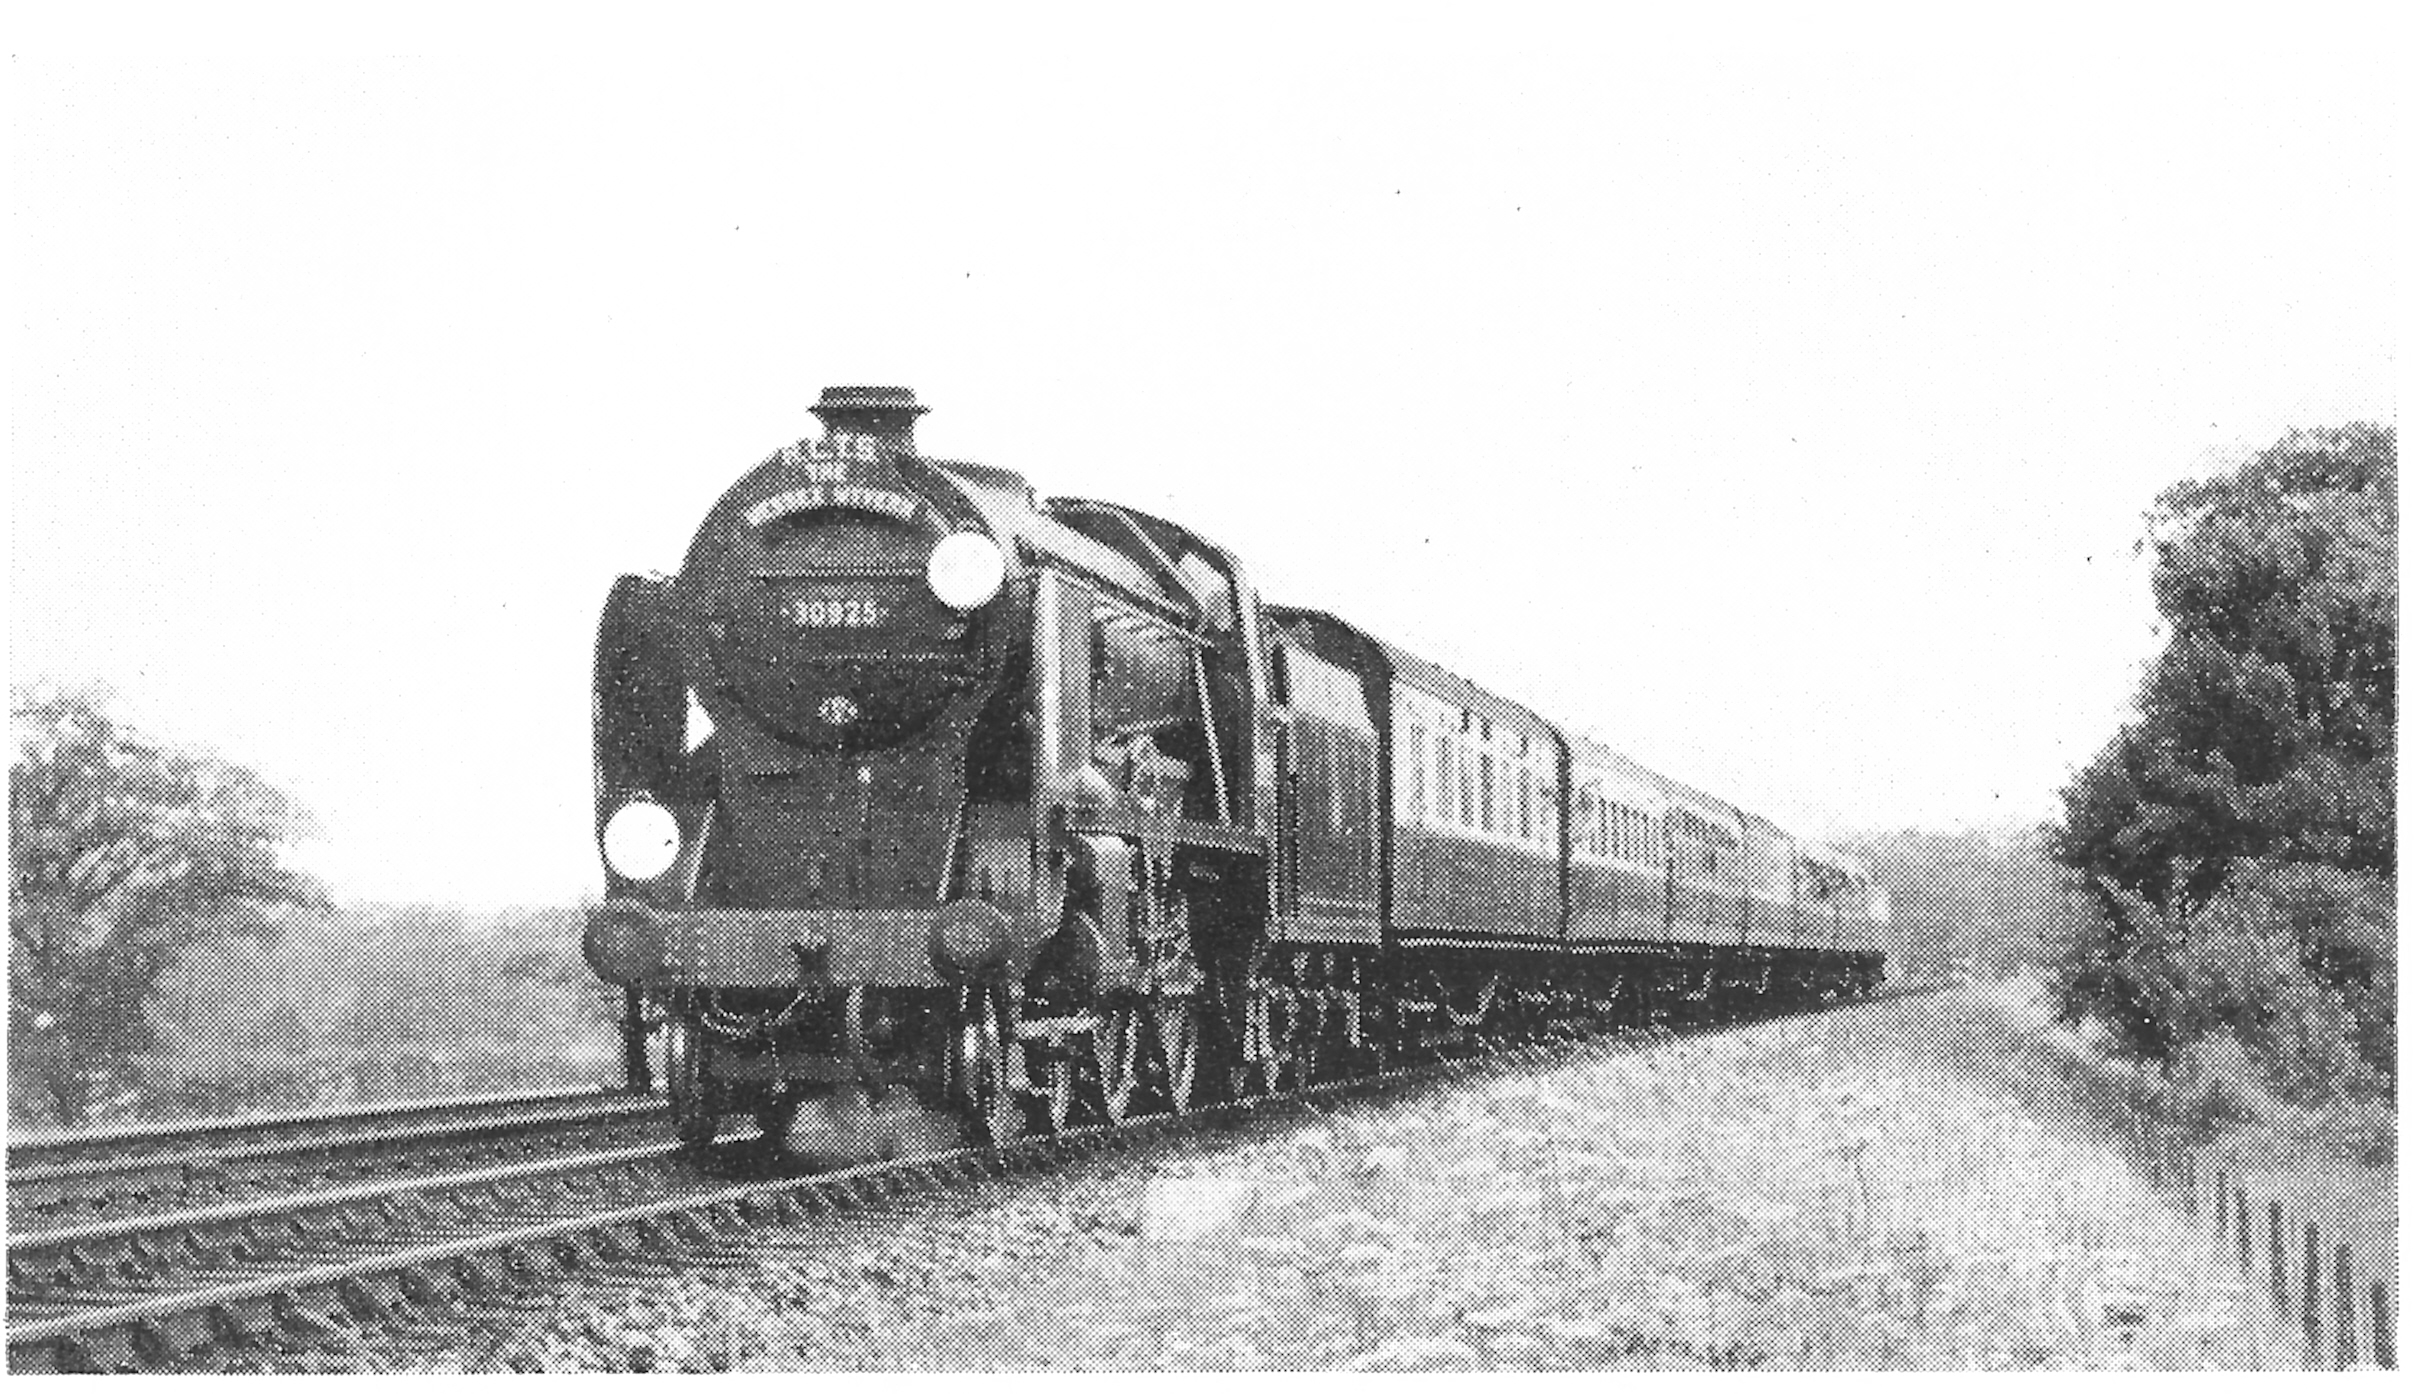 The Wessex Wyvern. 8th July 1956. The RCTS special train approaching Brockenhurst hauled by 30925. C.P. Boocock
Scanned from August 1956 RO. The final leg of this rail tour, from Andover to Waterloo, was worked by N15X 32329 Stephenson on its last day in regular service.